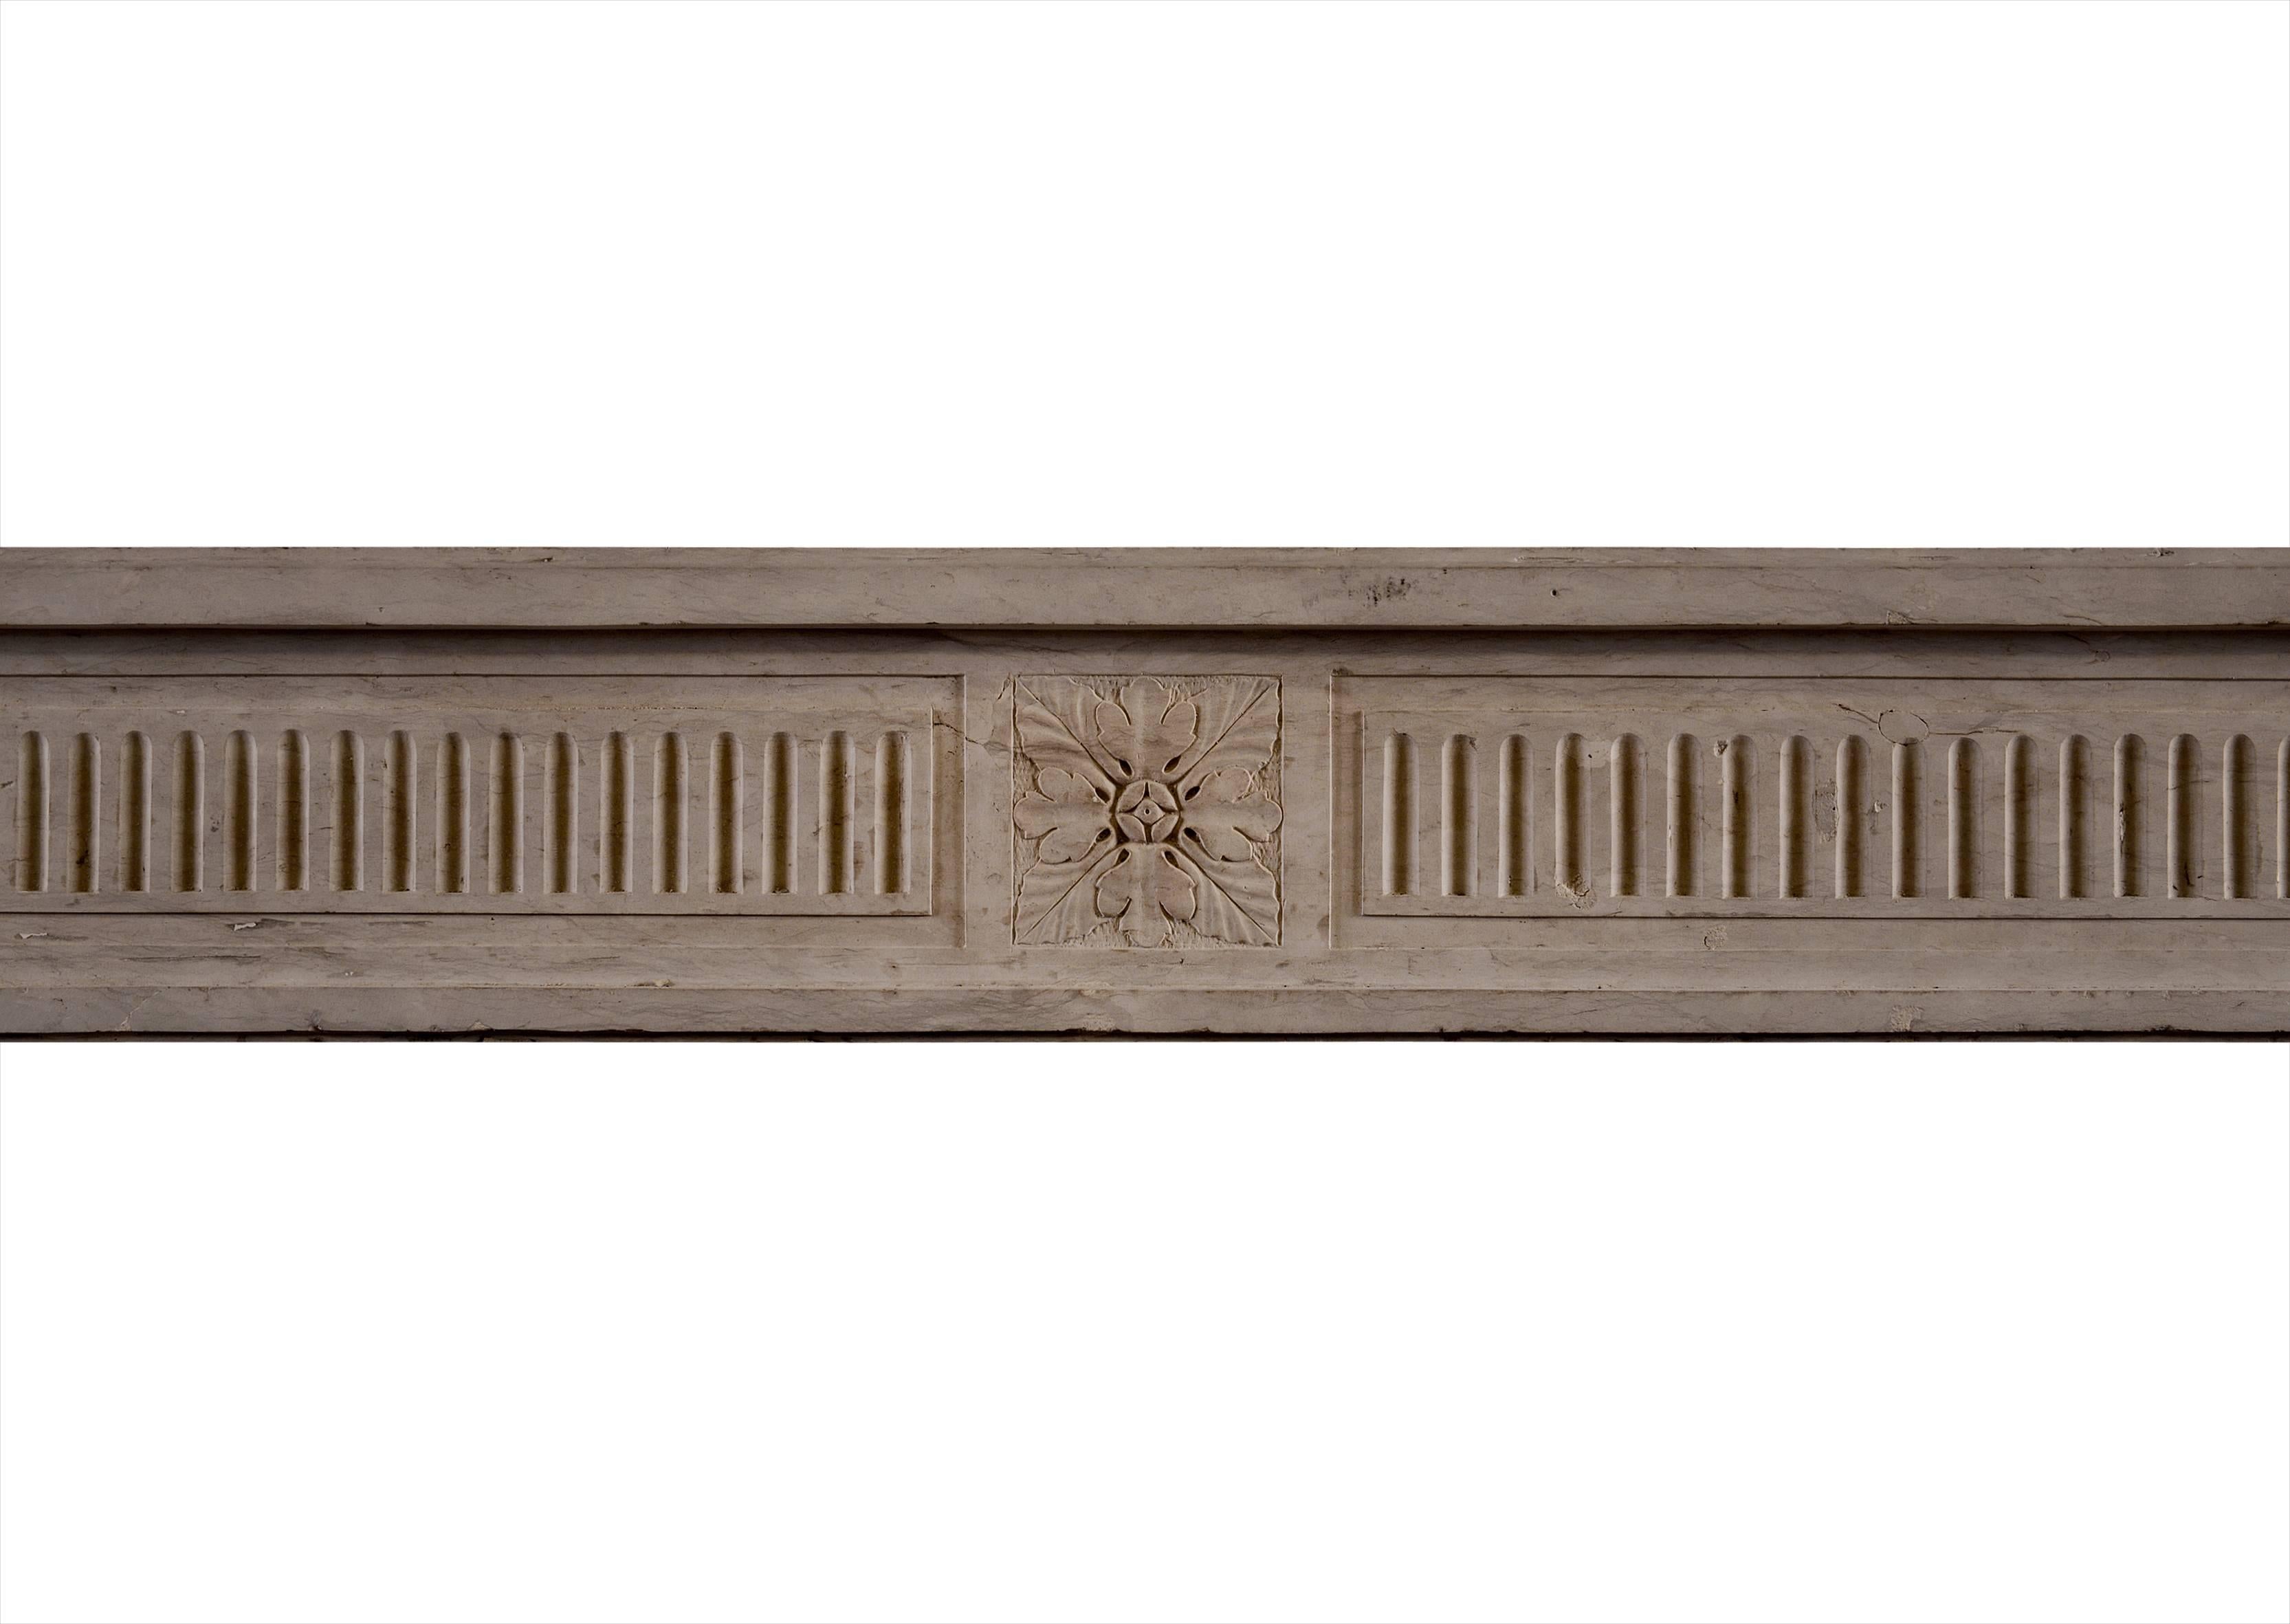 A fine quality Louis XVI Directoire limestone fireplace. The fluted frieze with carved rosette to centre, flanked by finely carved end paterae. The fluted jambs with diamond motif below. Very crisp carving of a hard, light limestone. Late 18th